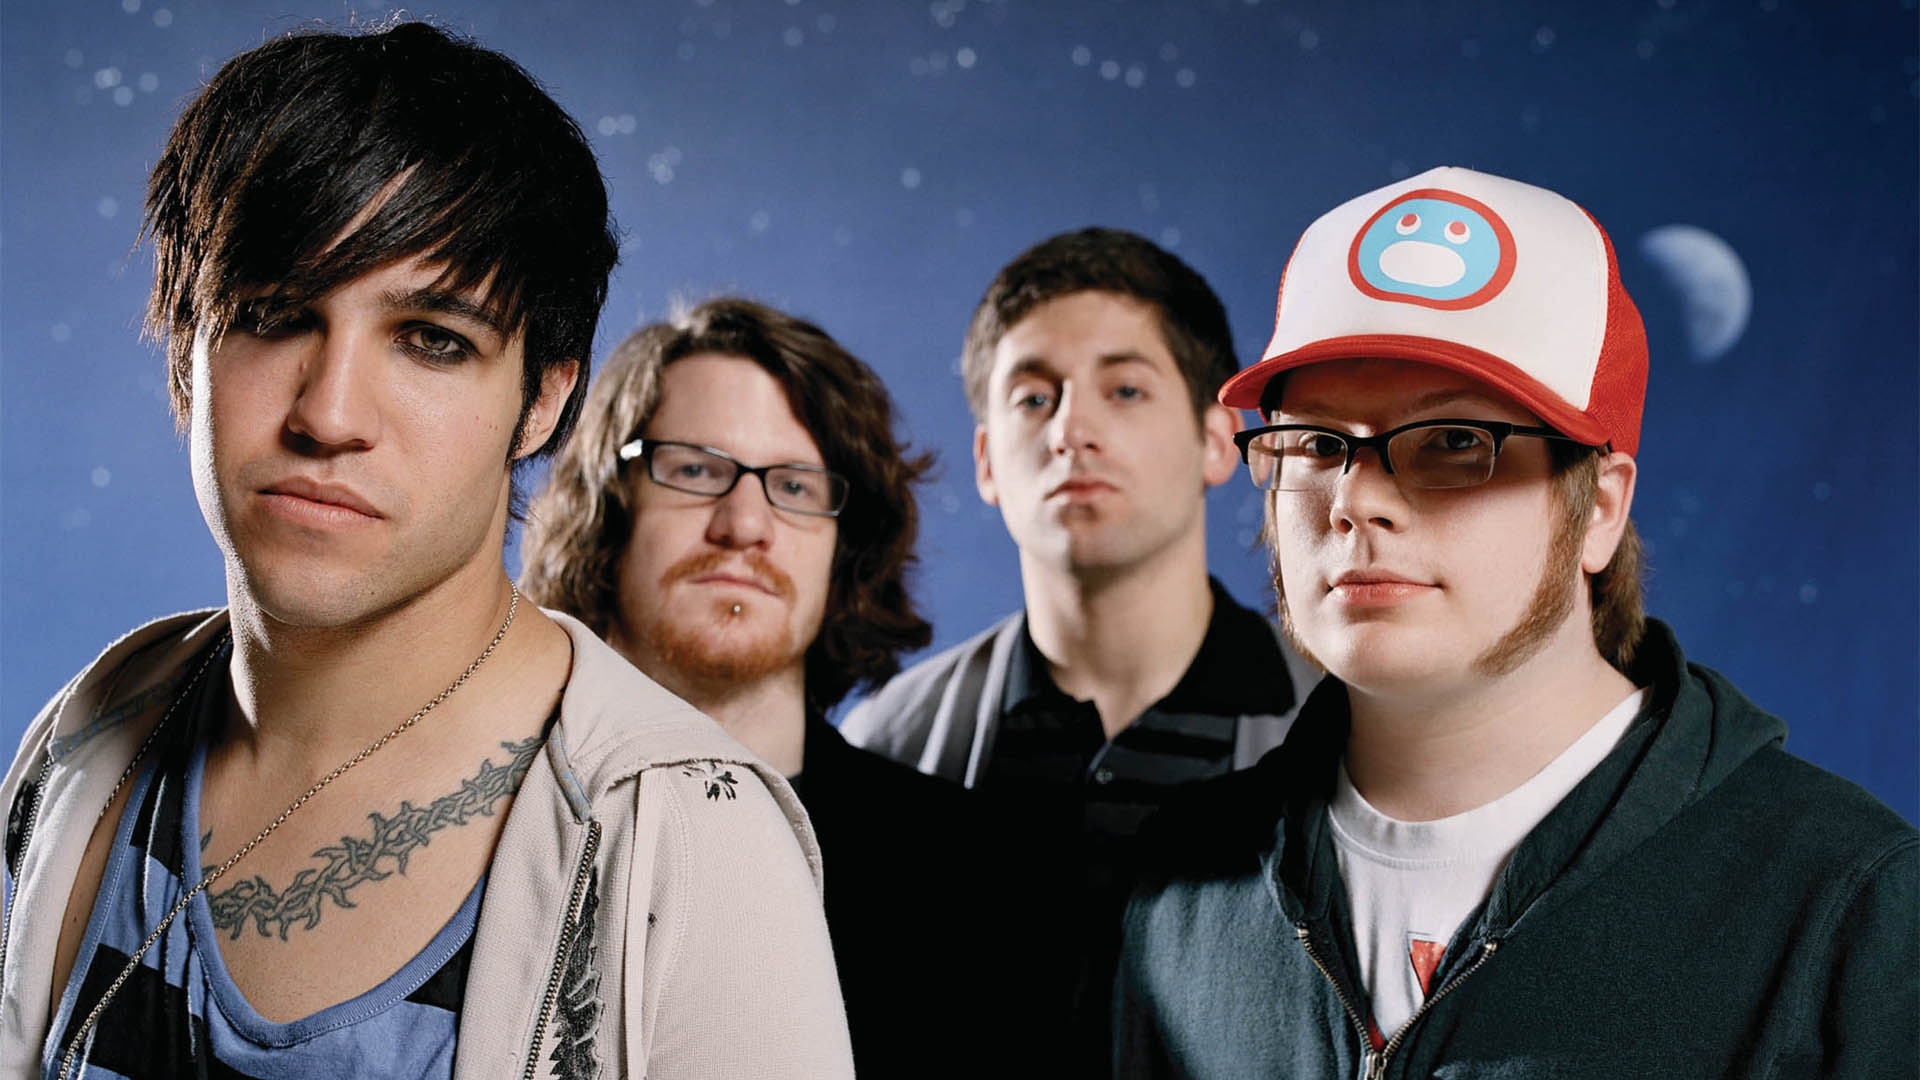 Fall Out Boy For Desktop - Fall Out Boy In 2005 , HD Wallpaper & Backgrounds